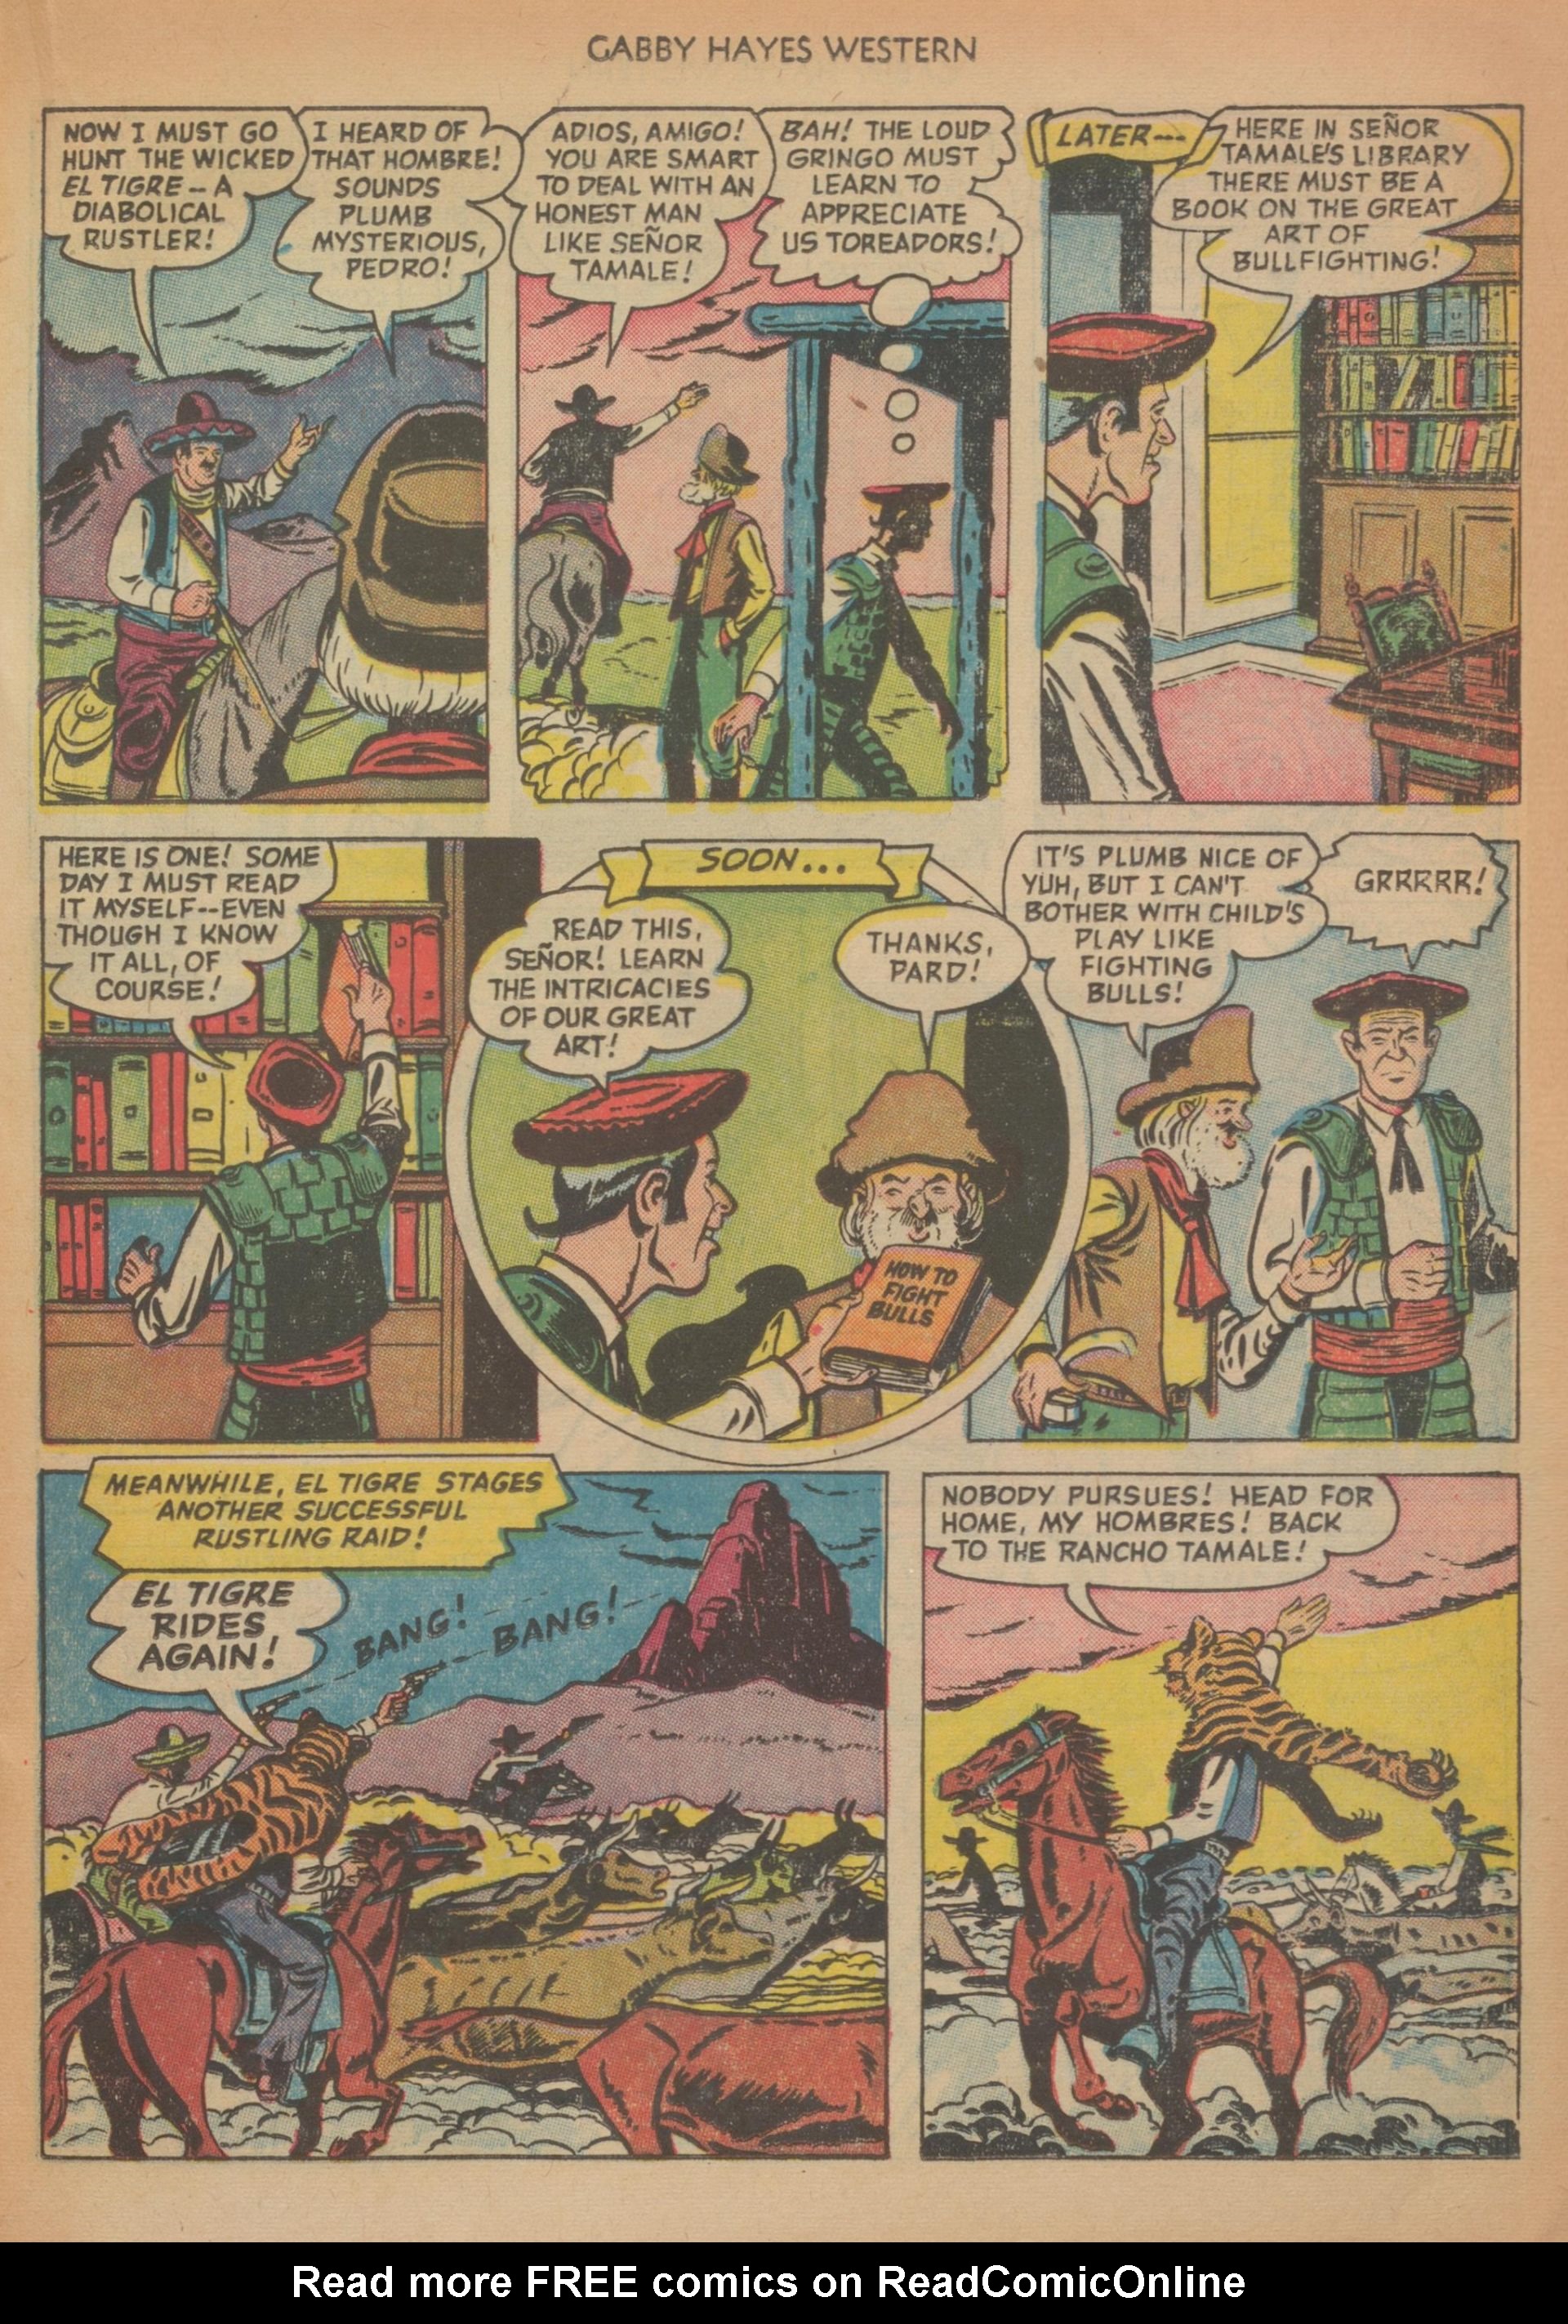 Read online Gabby Hayes Western comic -  Issue #39 - 17